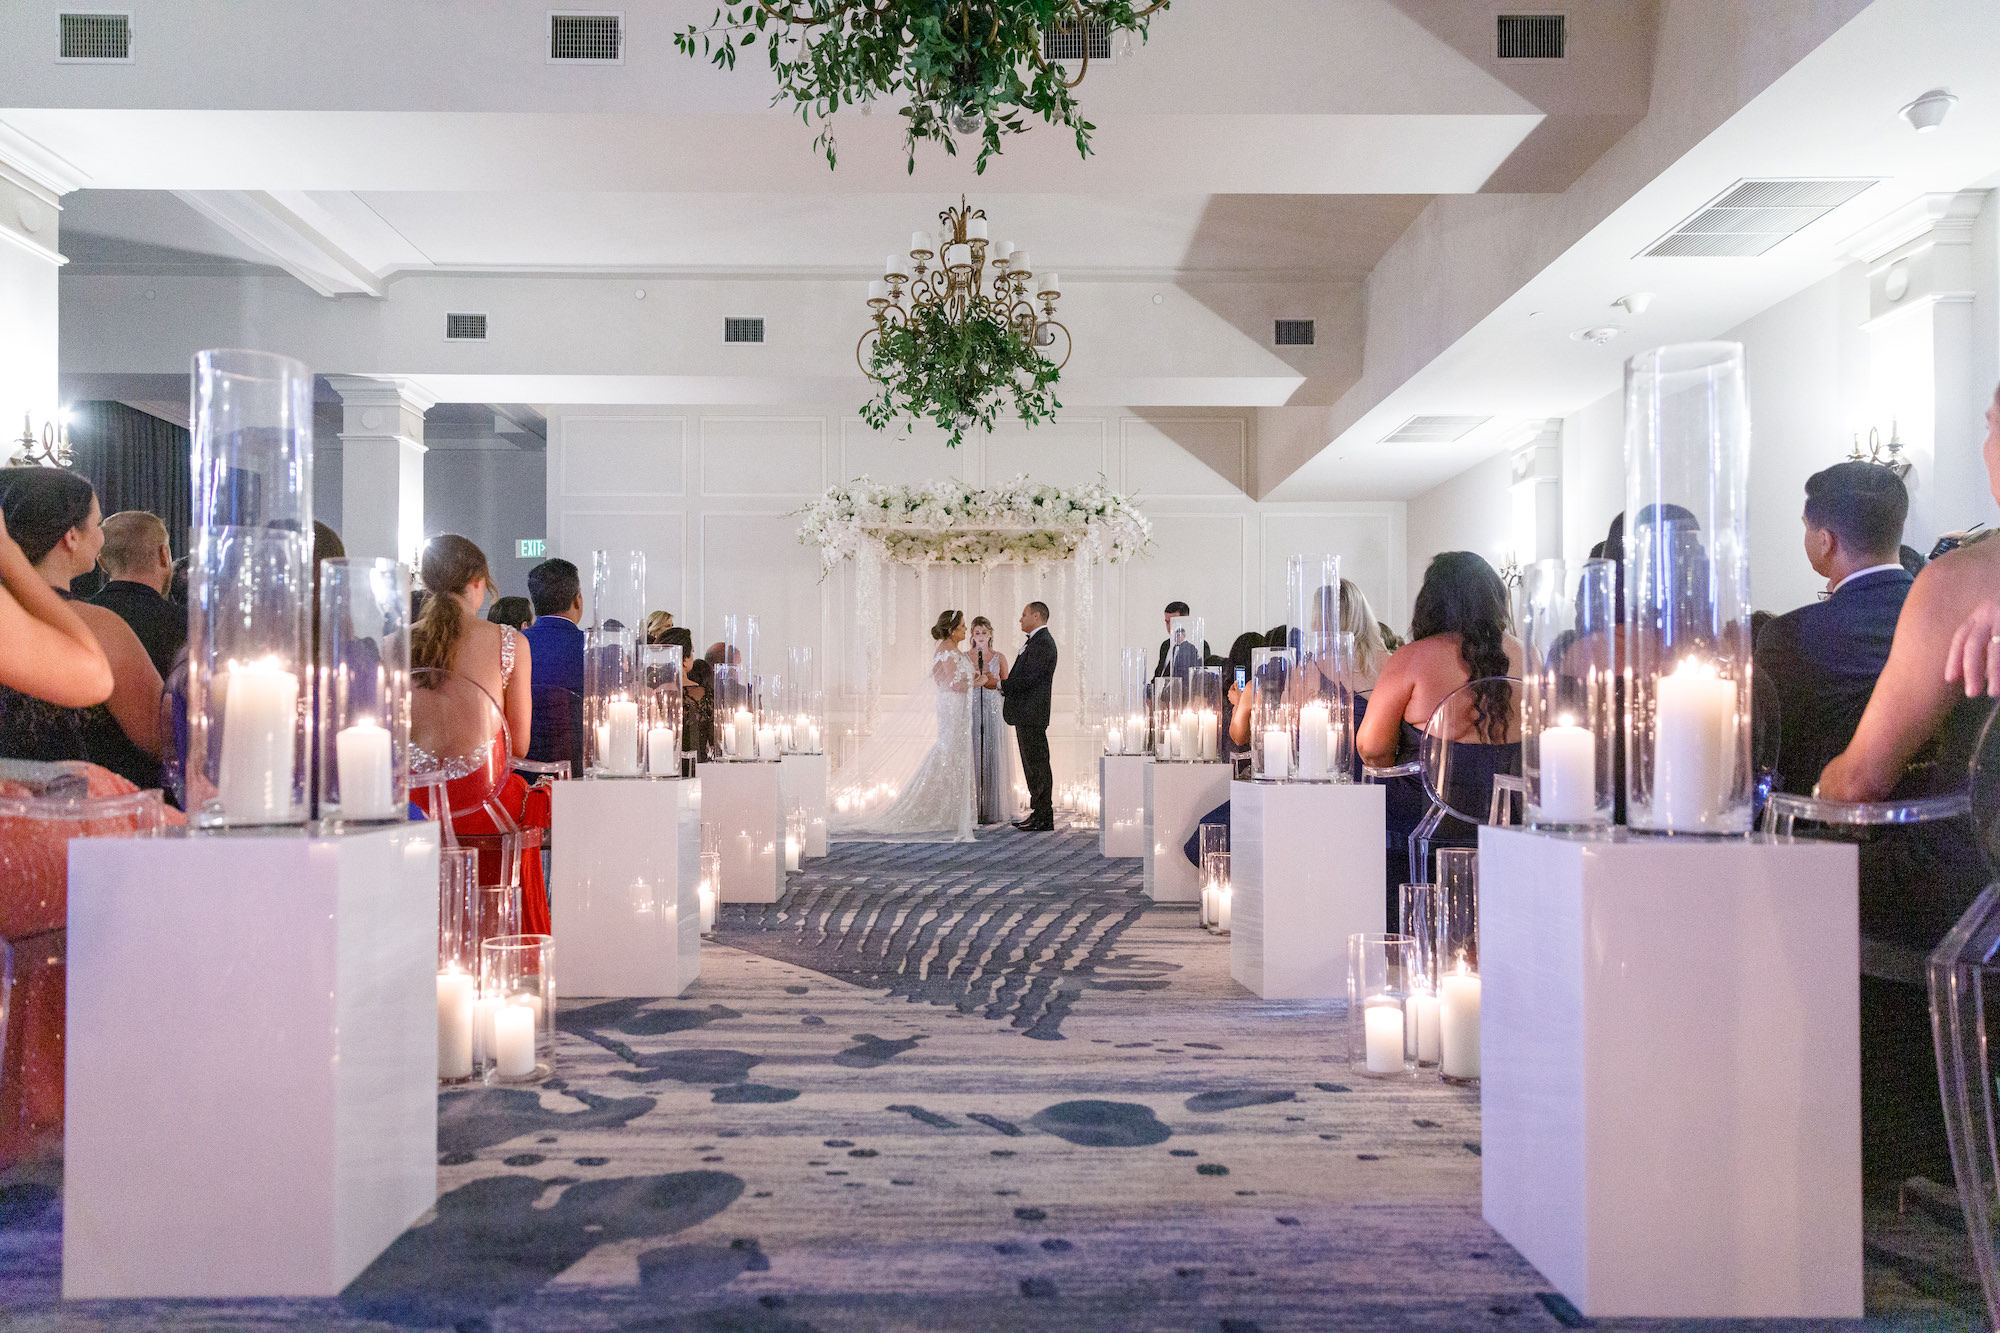 Modern Timeless Candlelit Wedding Aisle Ceremony Decor | White Pillar Candles | Ghost Acrylic Chairs Seating Inspiration | Buena Vista Ballroom Wedding Ceremony at St Pete Venue Don CeSar | St. Pete Florist FH Events